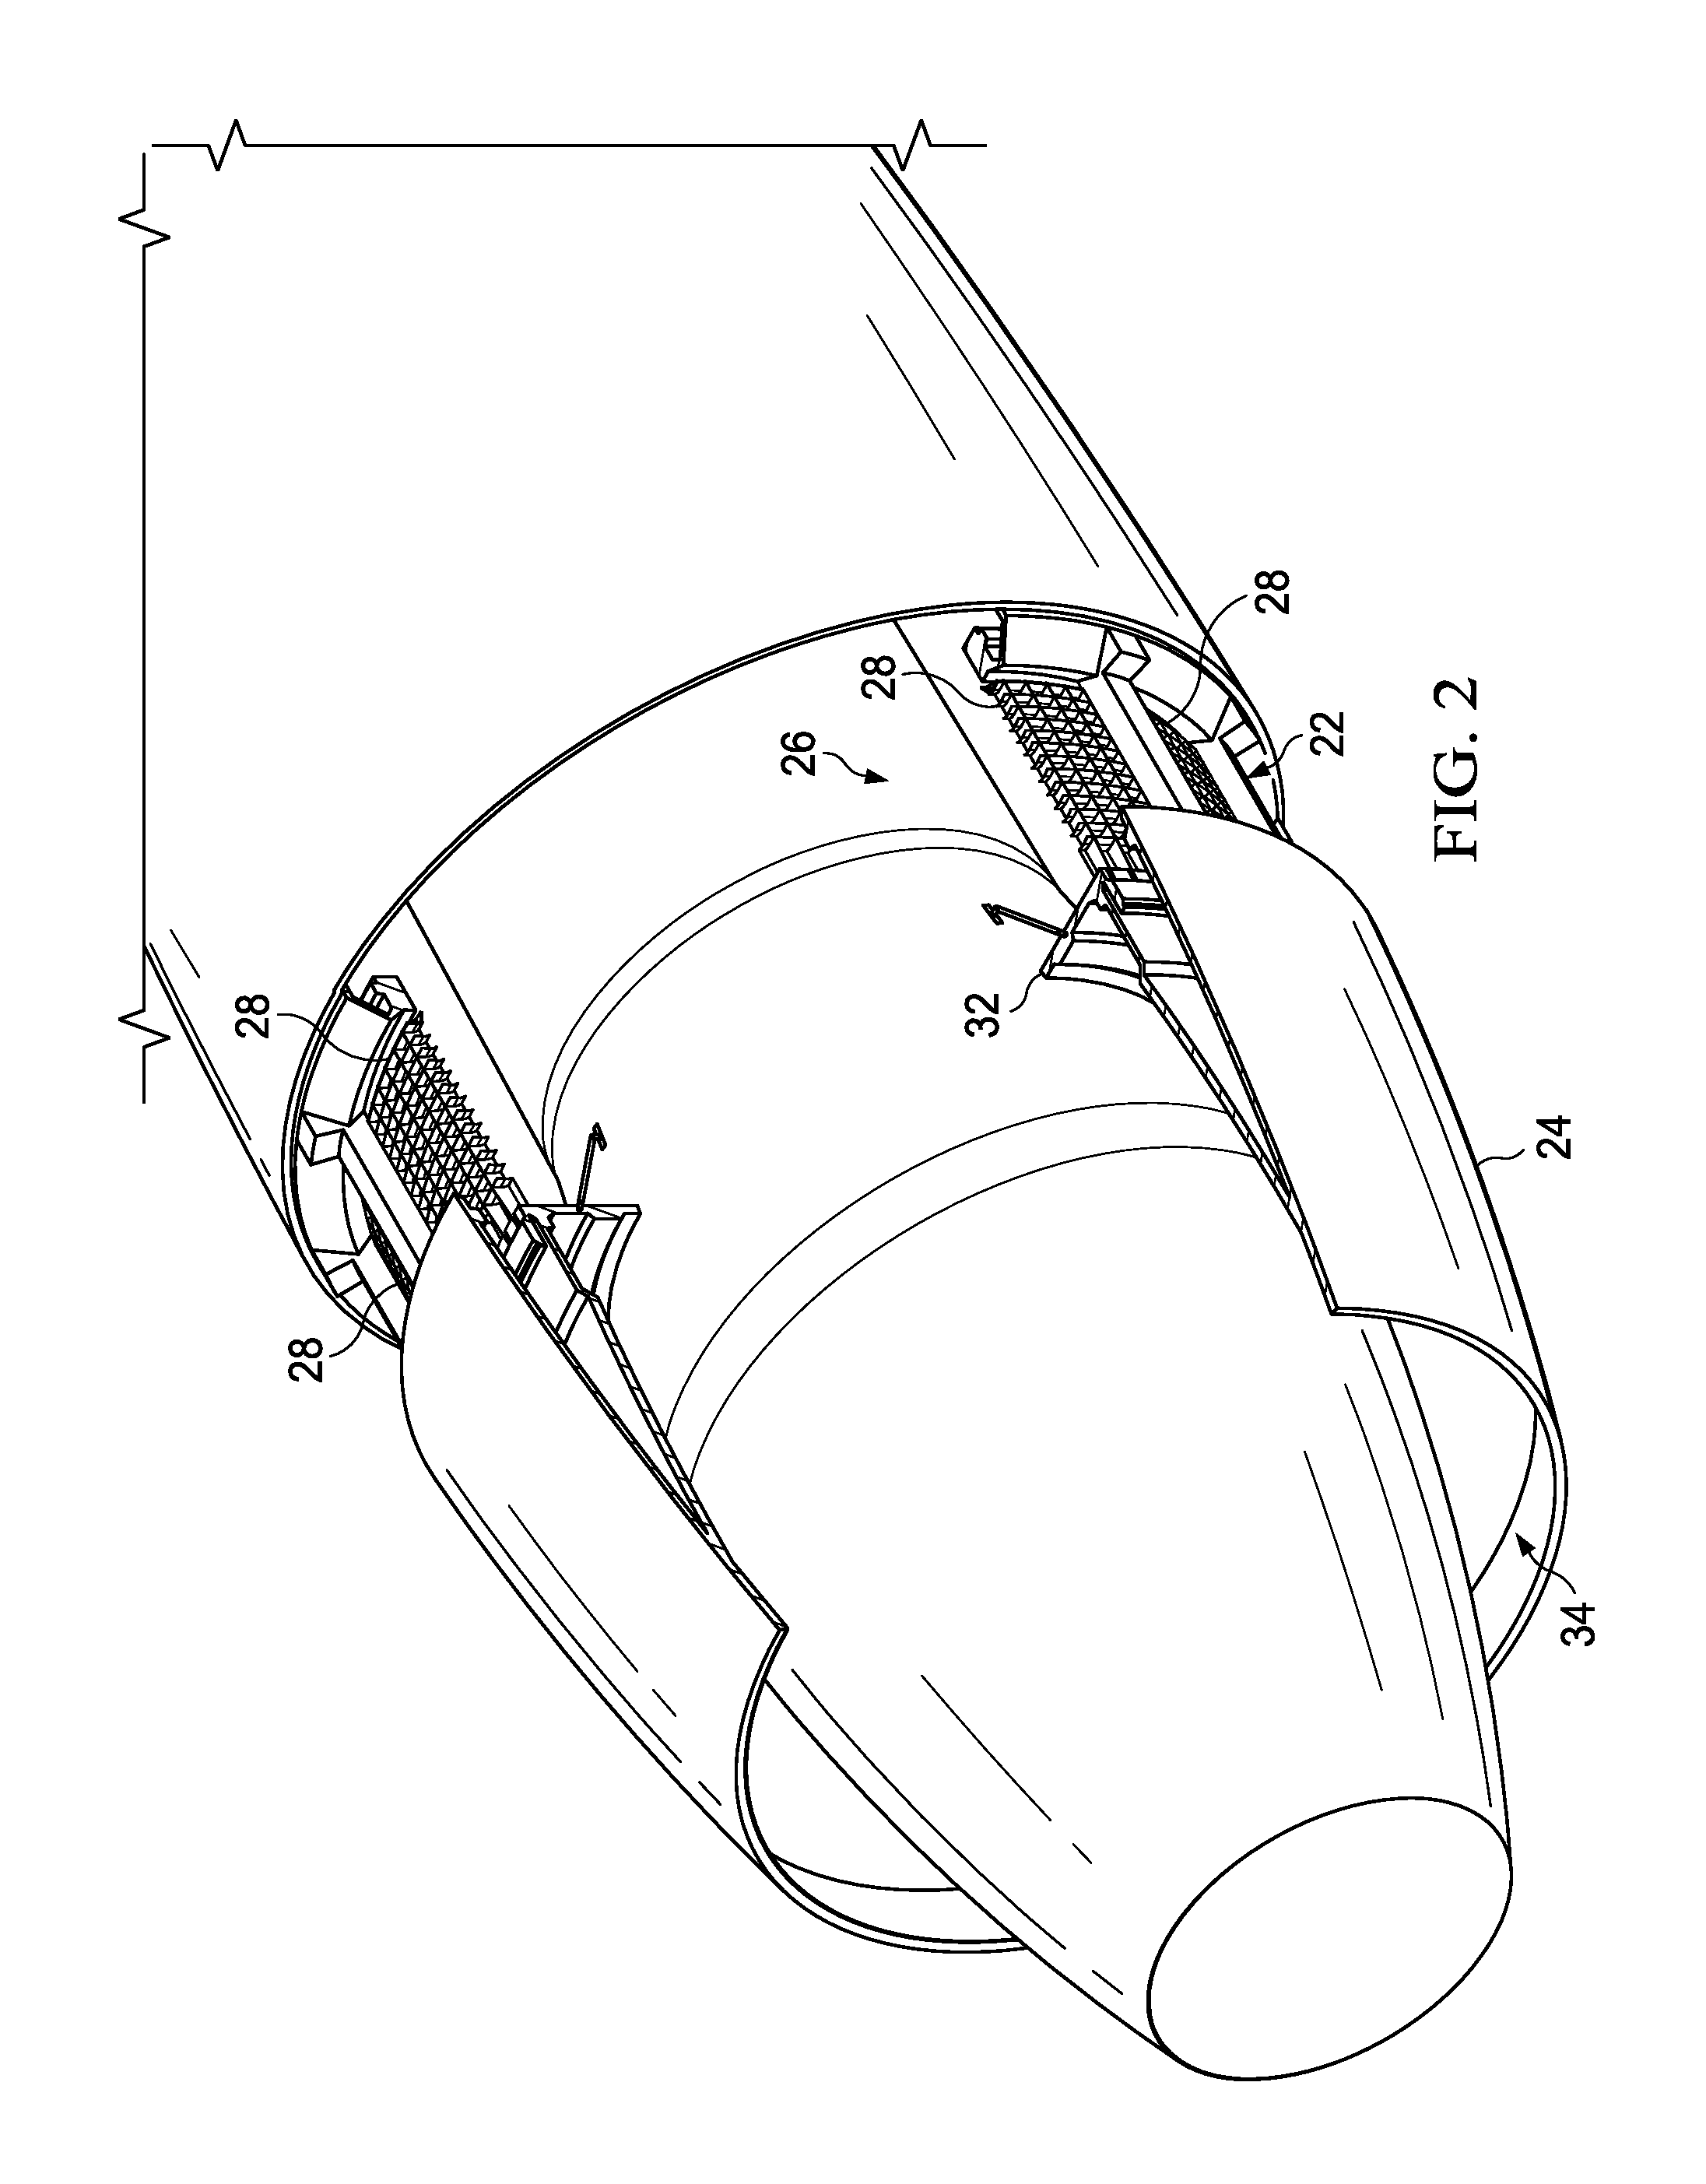 Thermoformed Cascades for Jet Engine Thrust Reversers